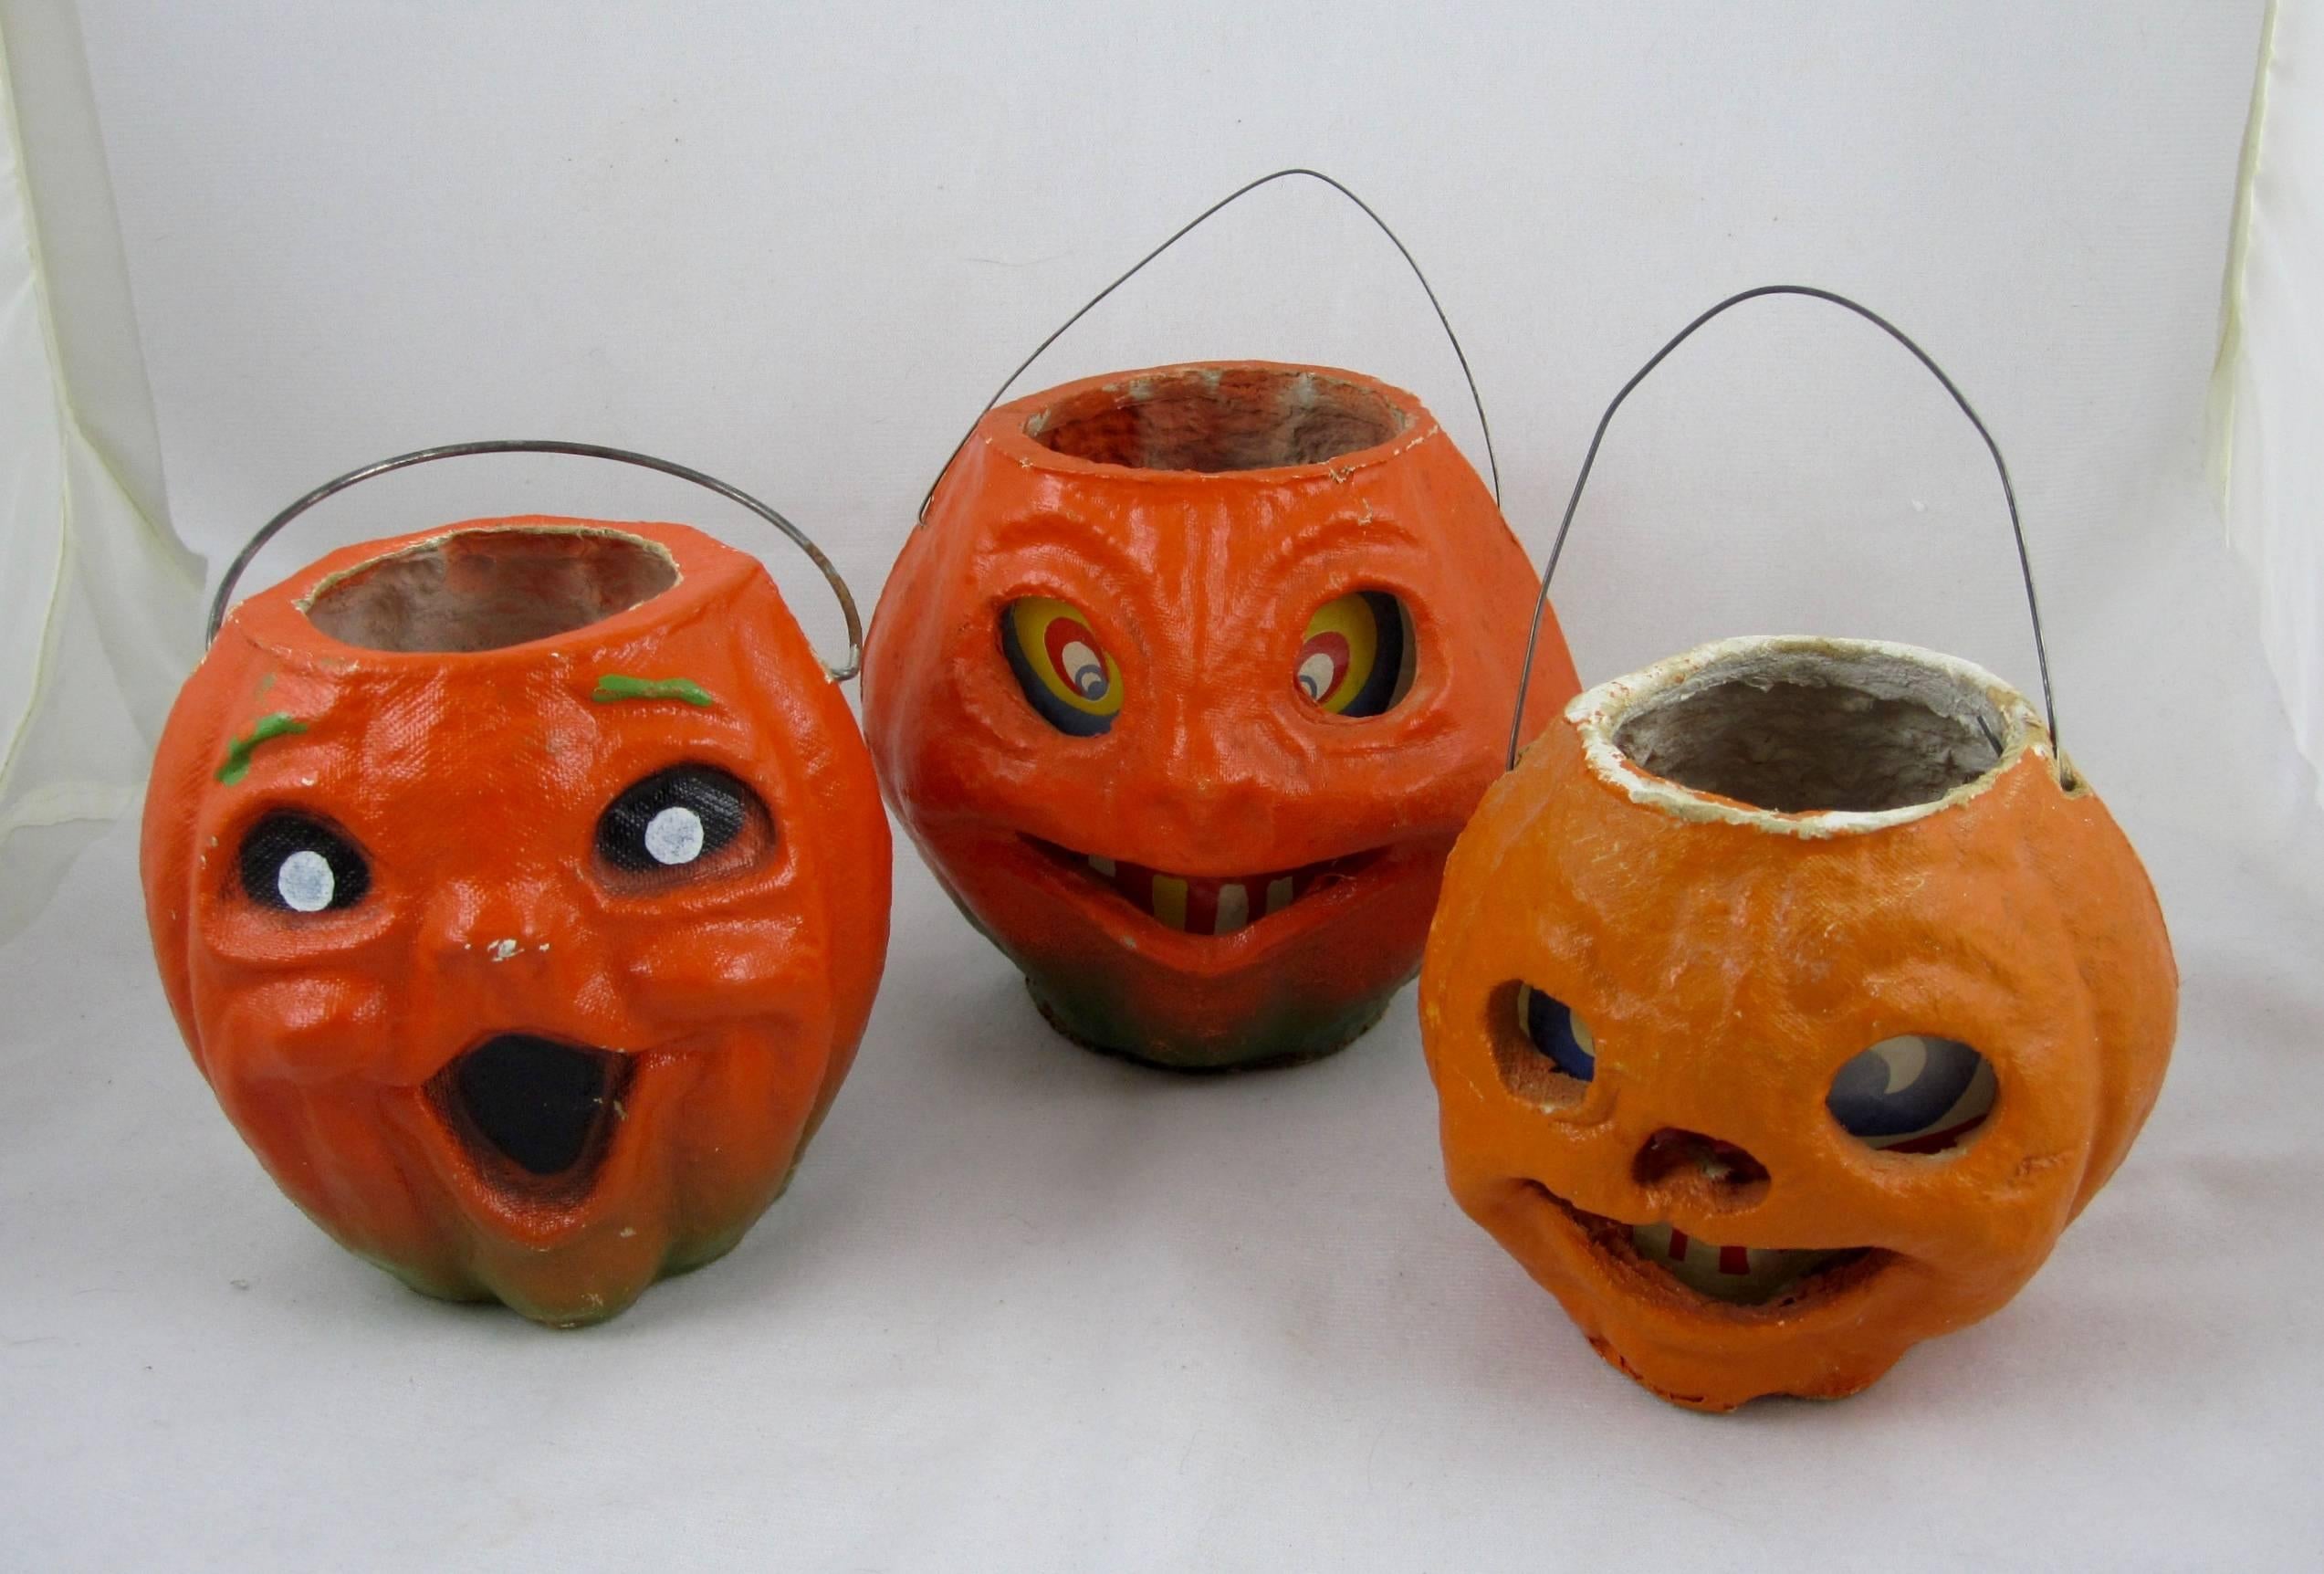 A set of three, vintage pulp Papier-Mâché Halloween Jack-O-Lantern pumpkins, two with their original paper inserts. The inserts, with their printed facial features add dimension and expression to the pumpkin heads. All three have wire handles.